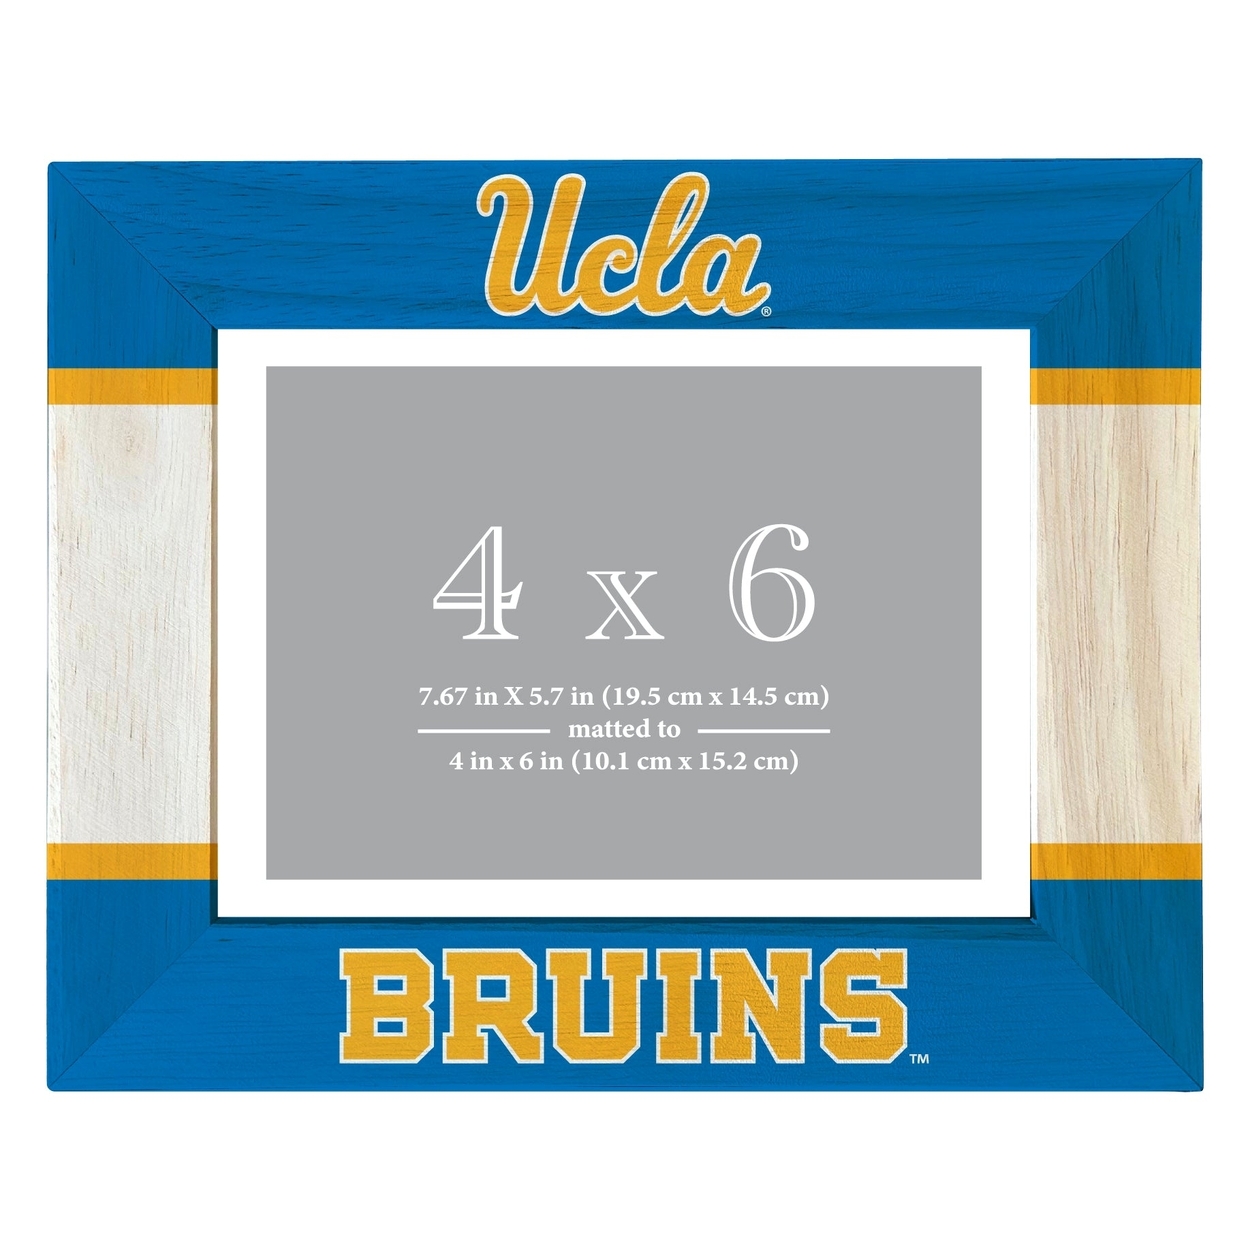 UCLA Bruins Wooden Photo Frame Matted To 4 X 6 Inch - Printed